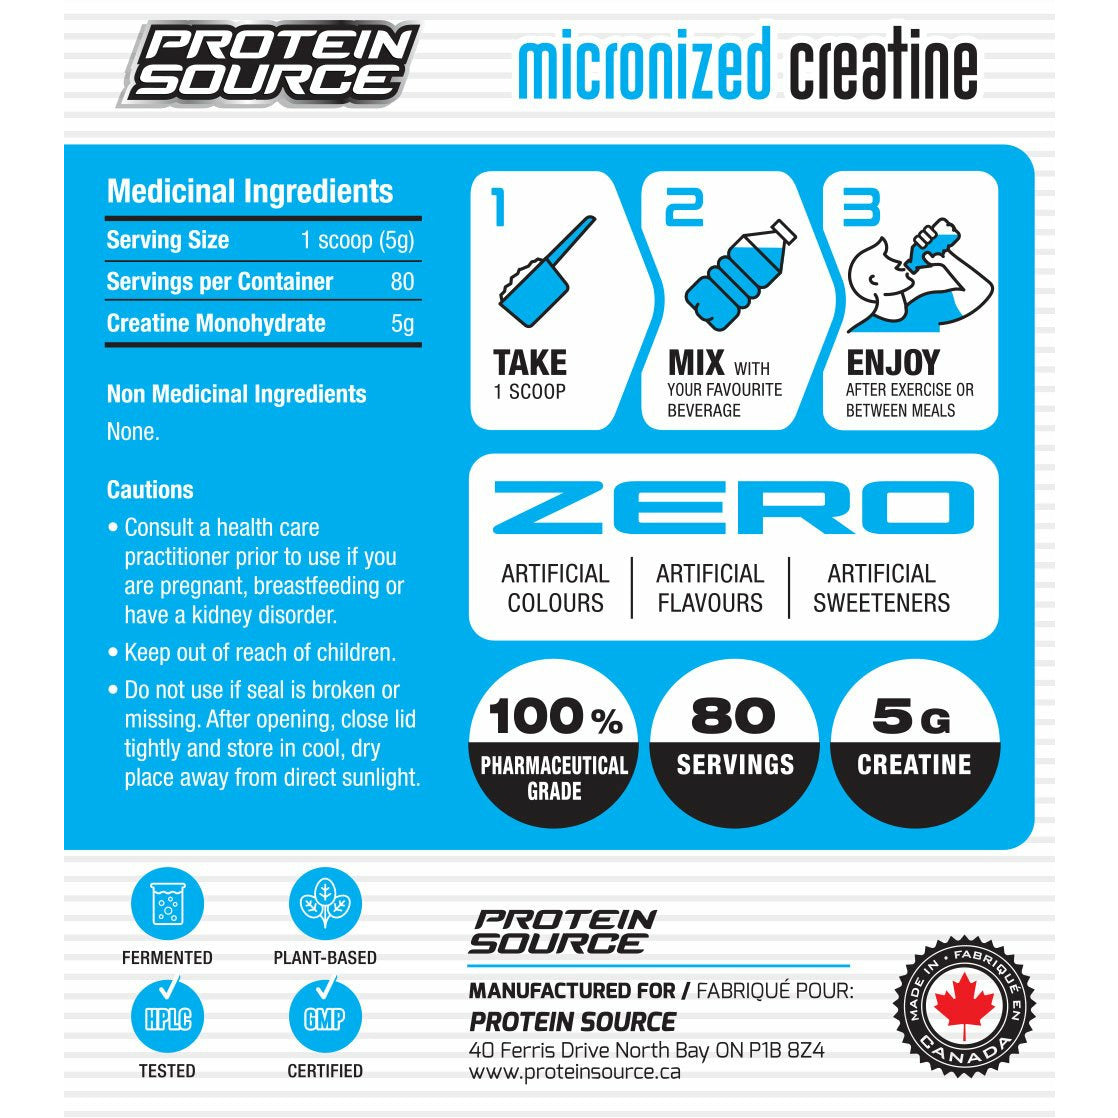 Protein Source Unflavored Micronized Creatine Monohydrate (1000g) Protein Source protein-source-unflavored-micronized-creatine-monohydrate-1000g